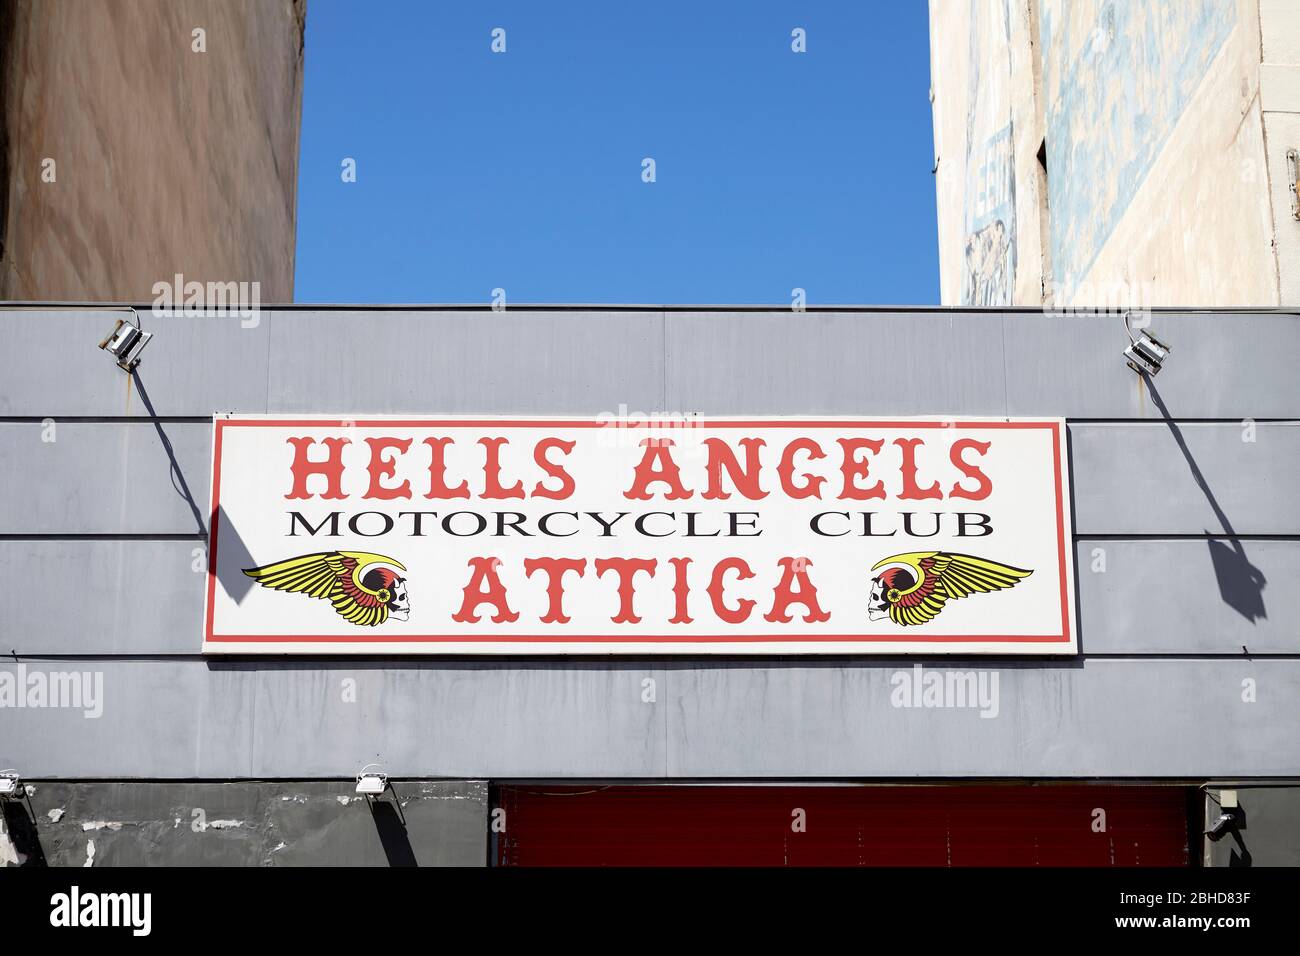 hells angels , motorcycle club at Athens Greece Stock Photo